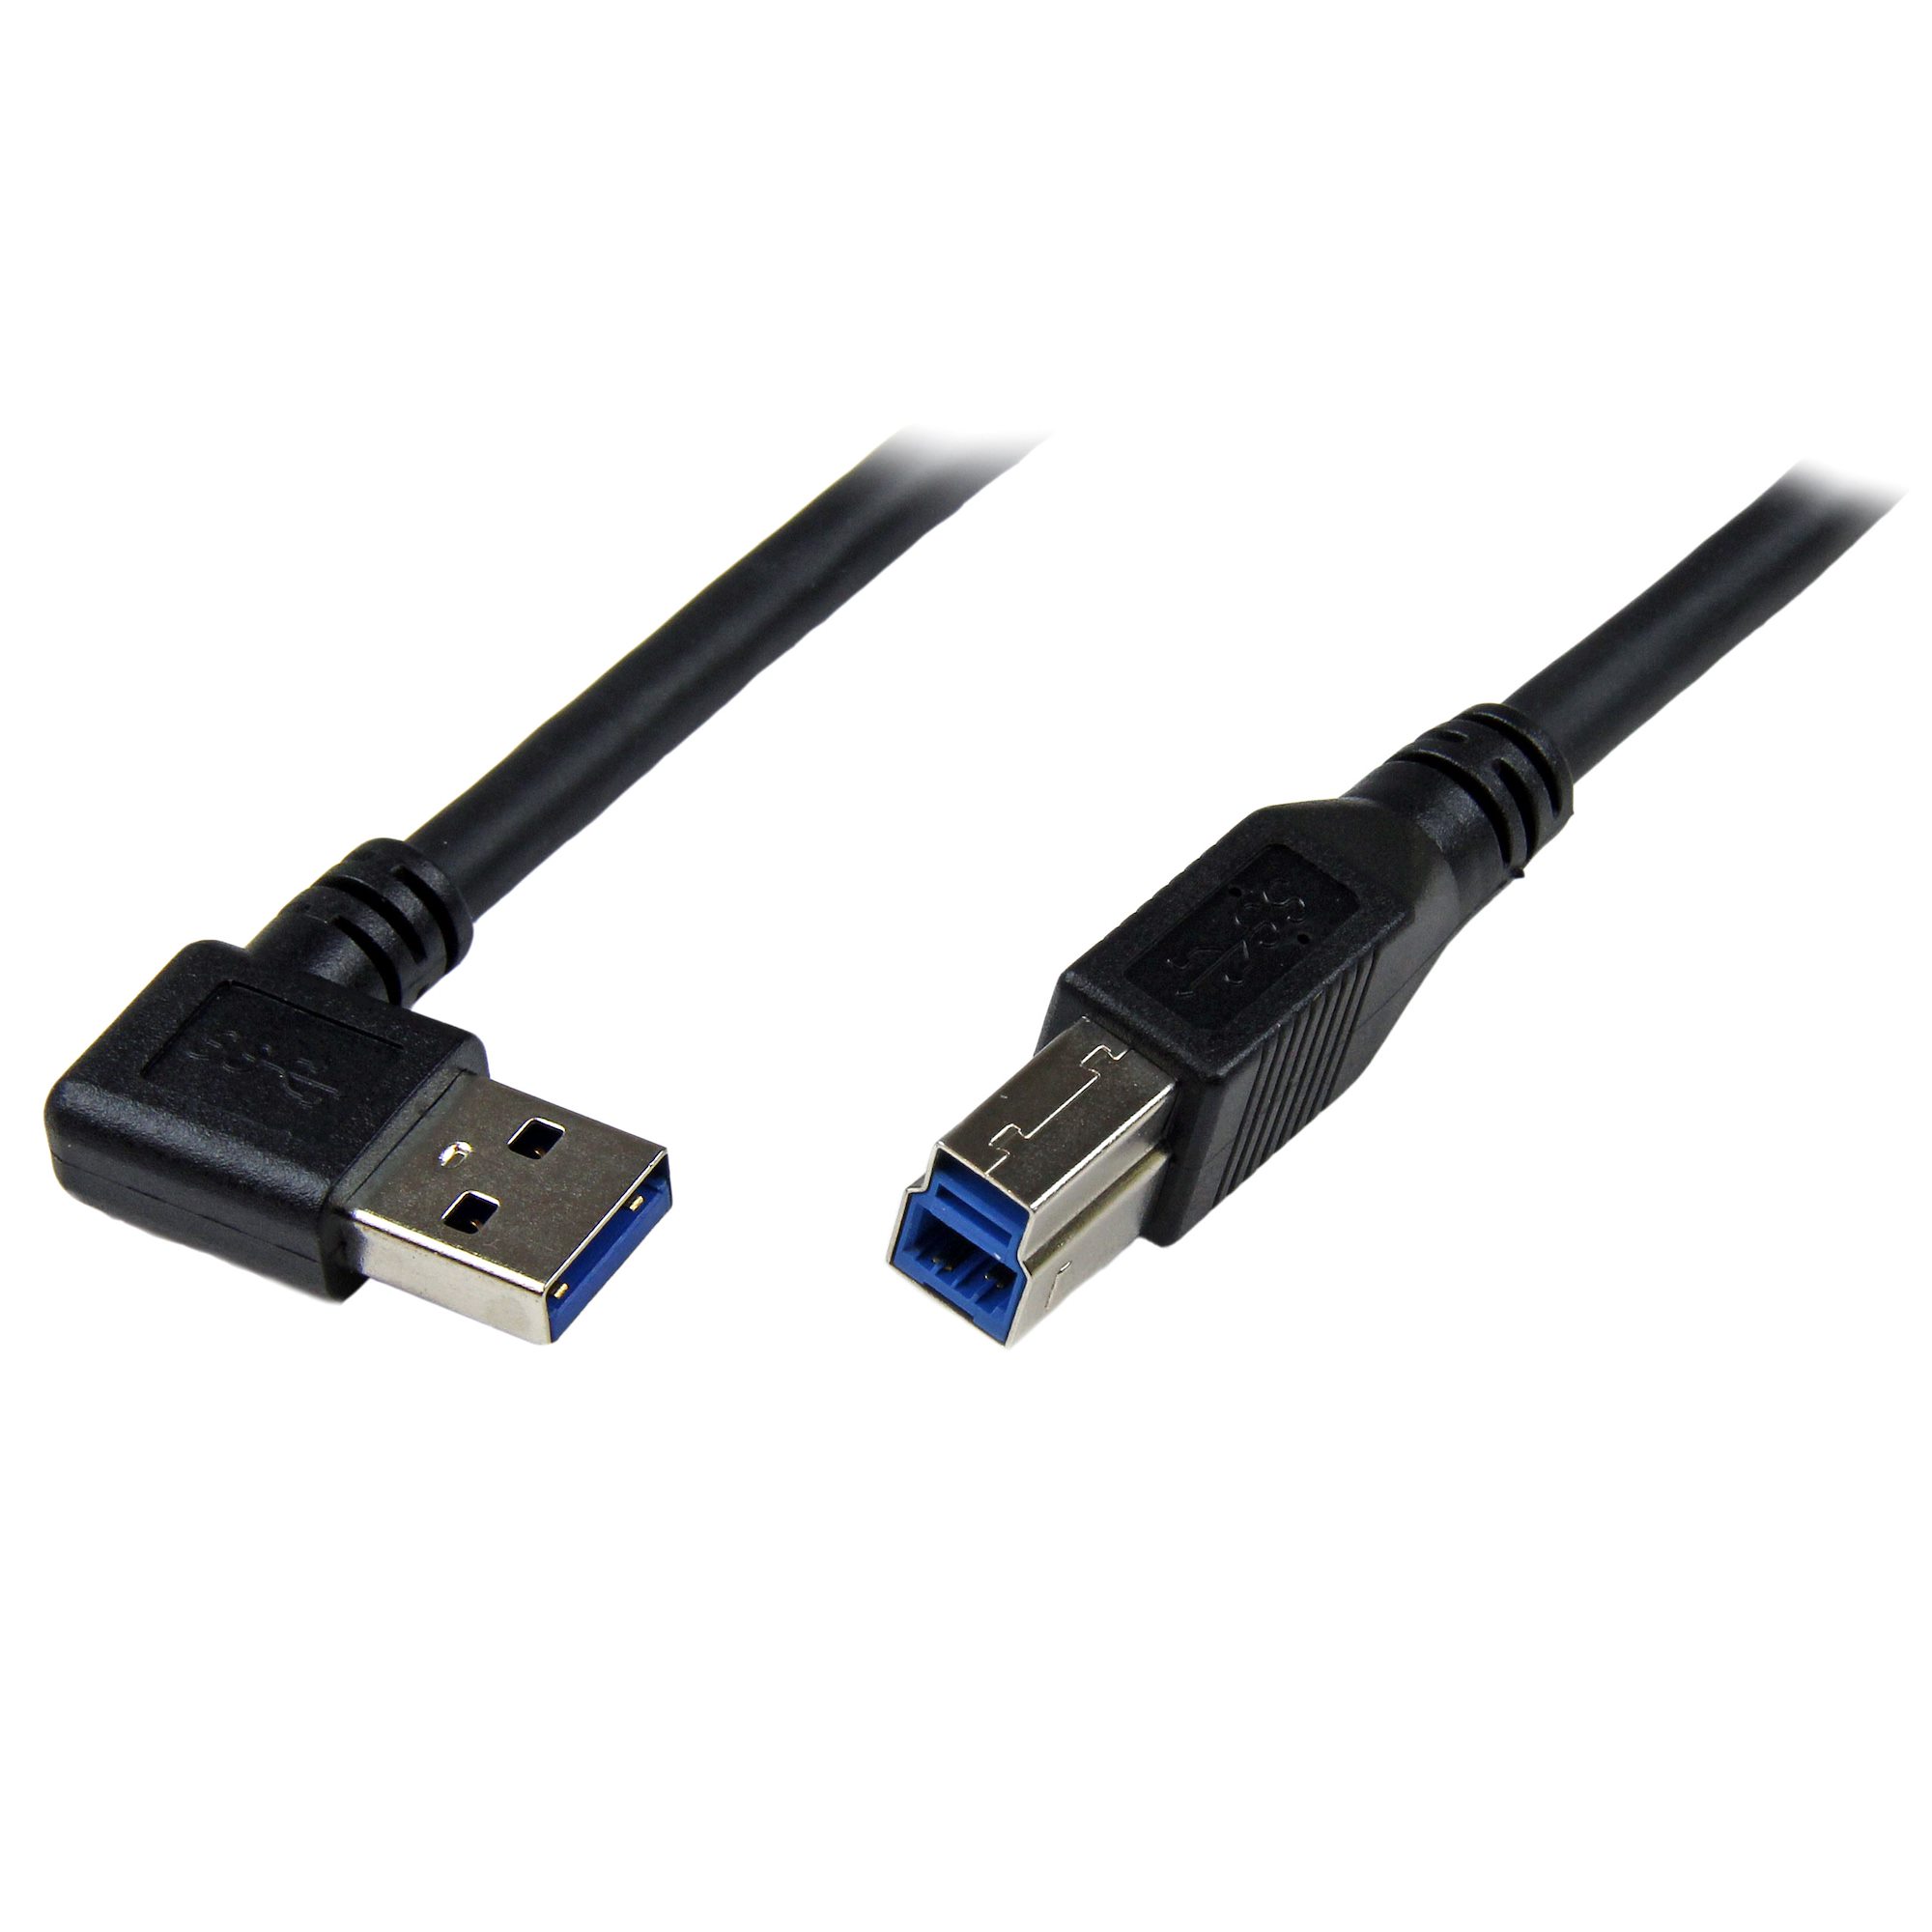 1m Black USB Cable Right Angle A to B - 3.0 Cables | StarTech.com